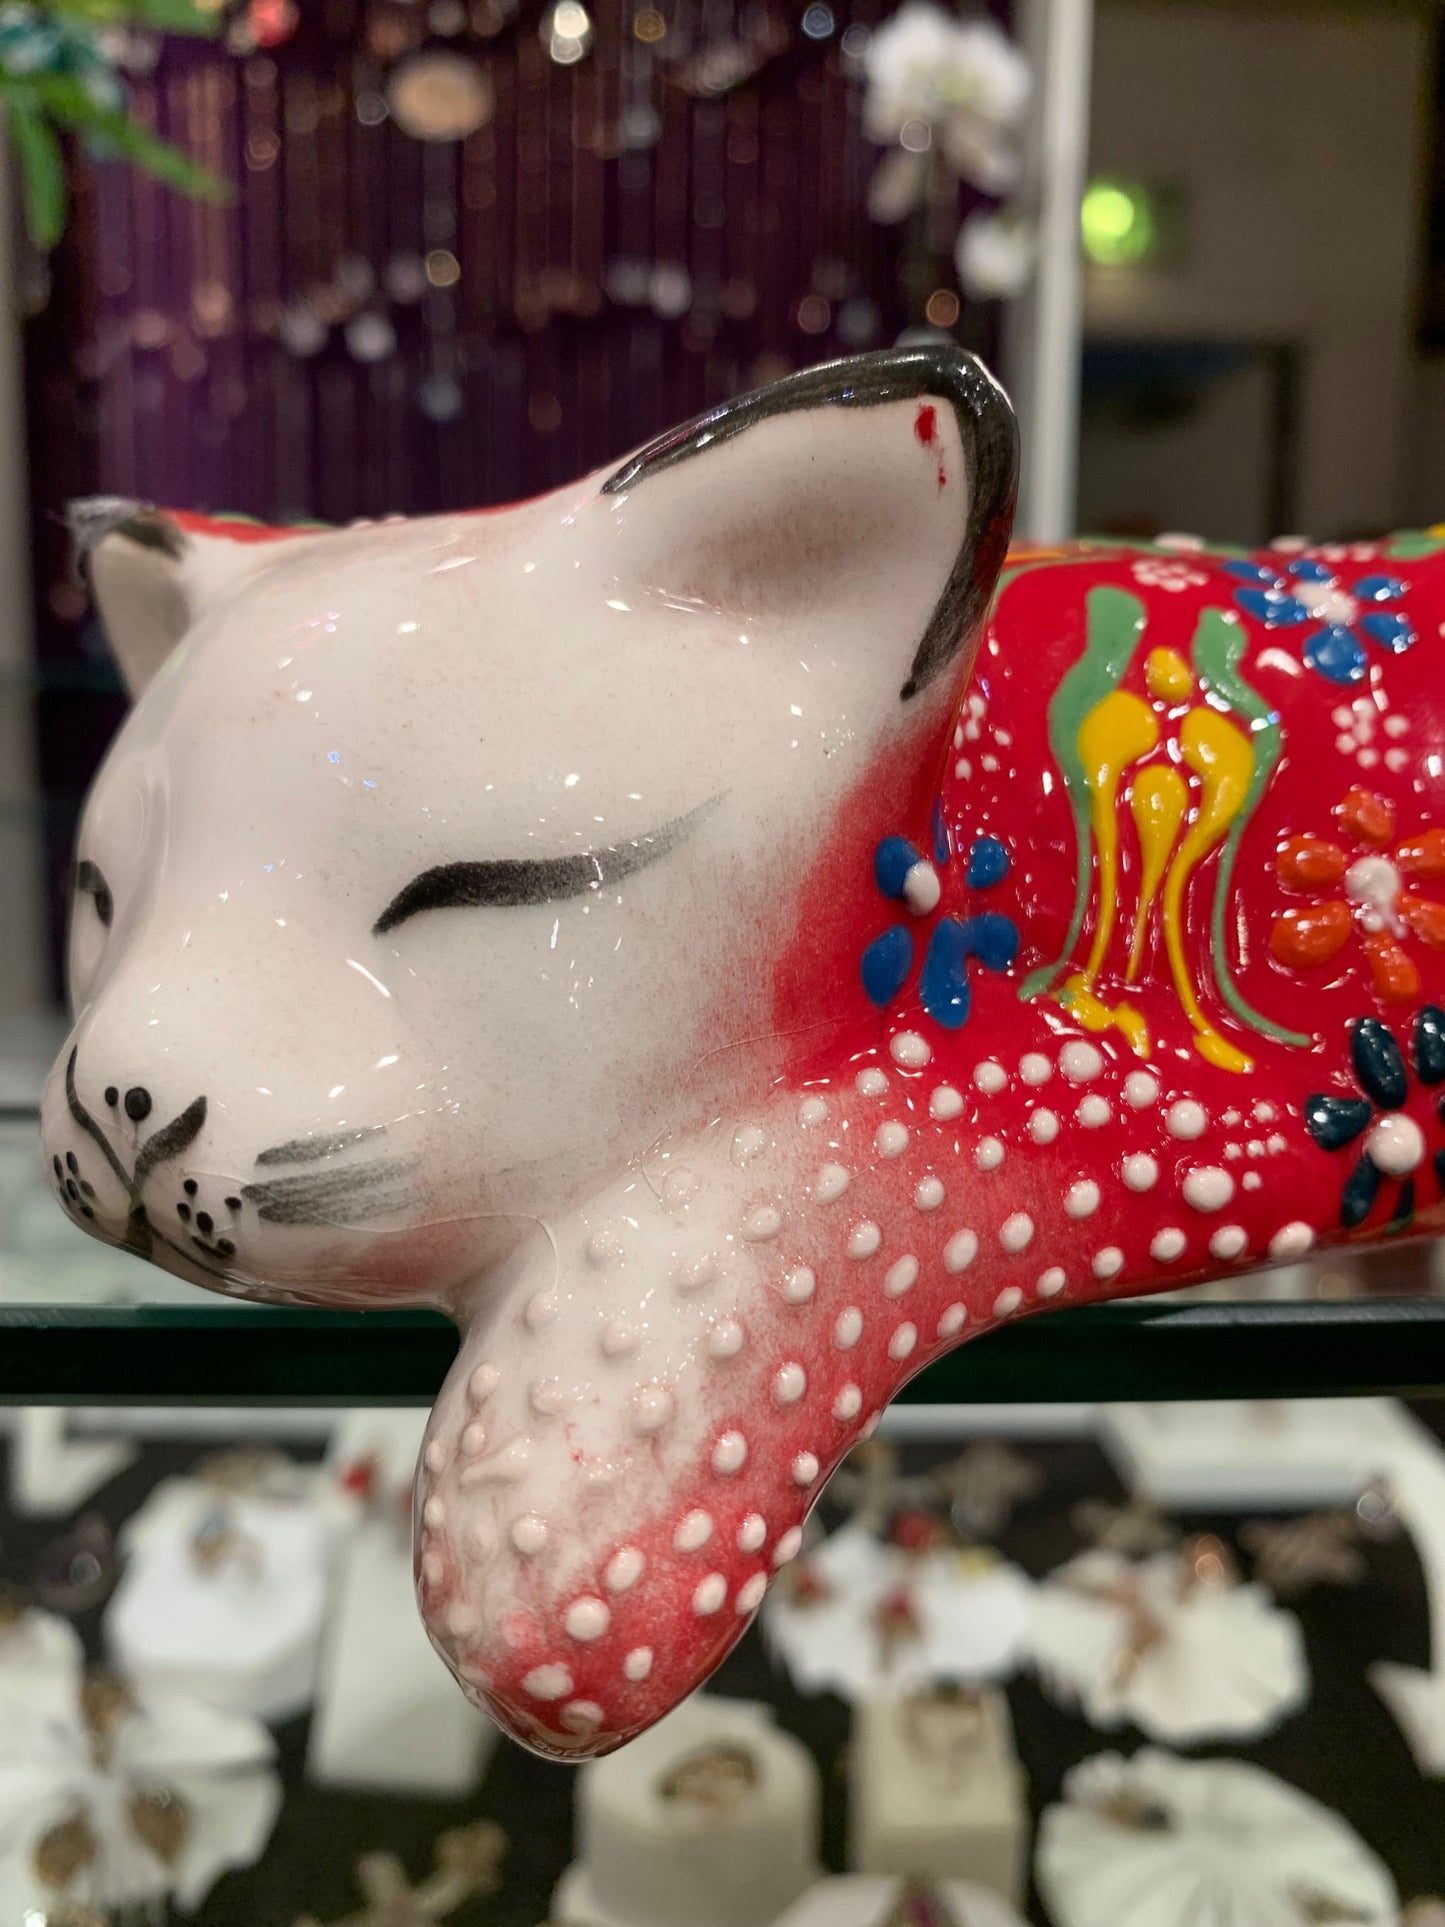 Sleepy Red Cat For Home Decoration